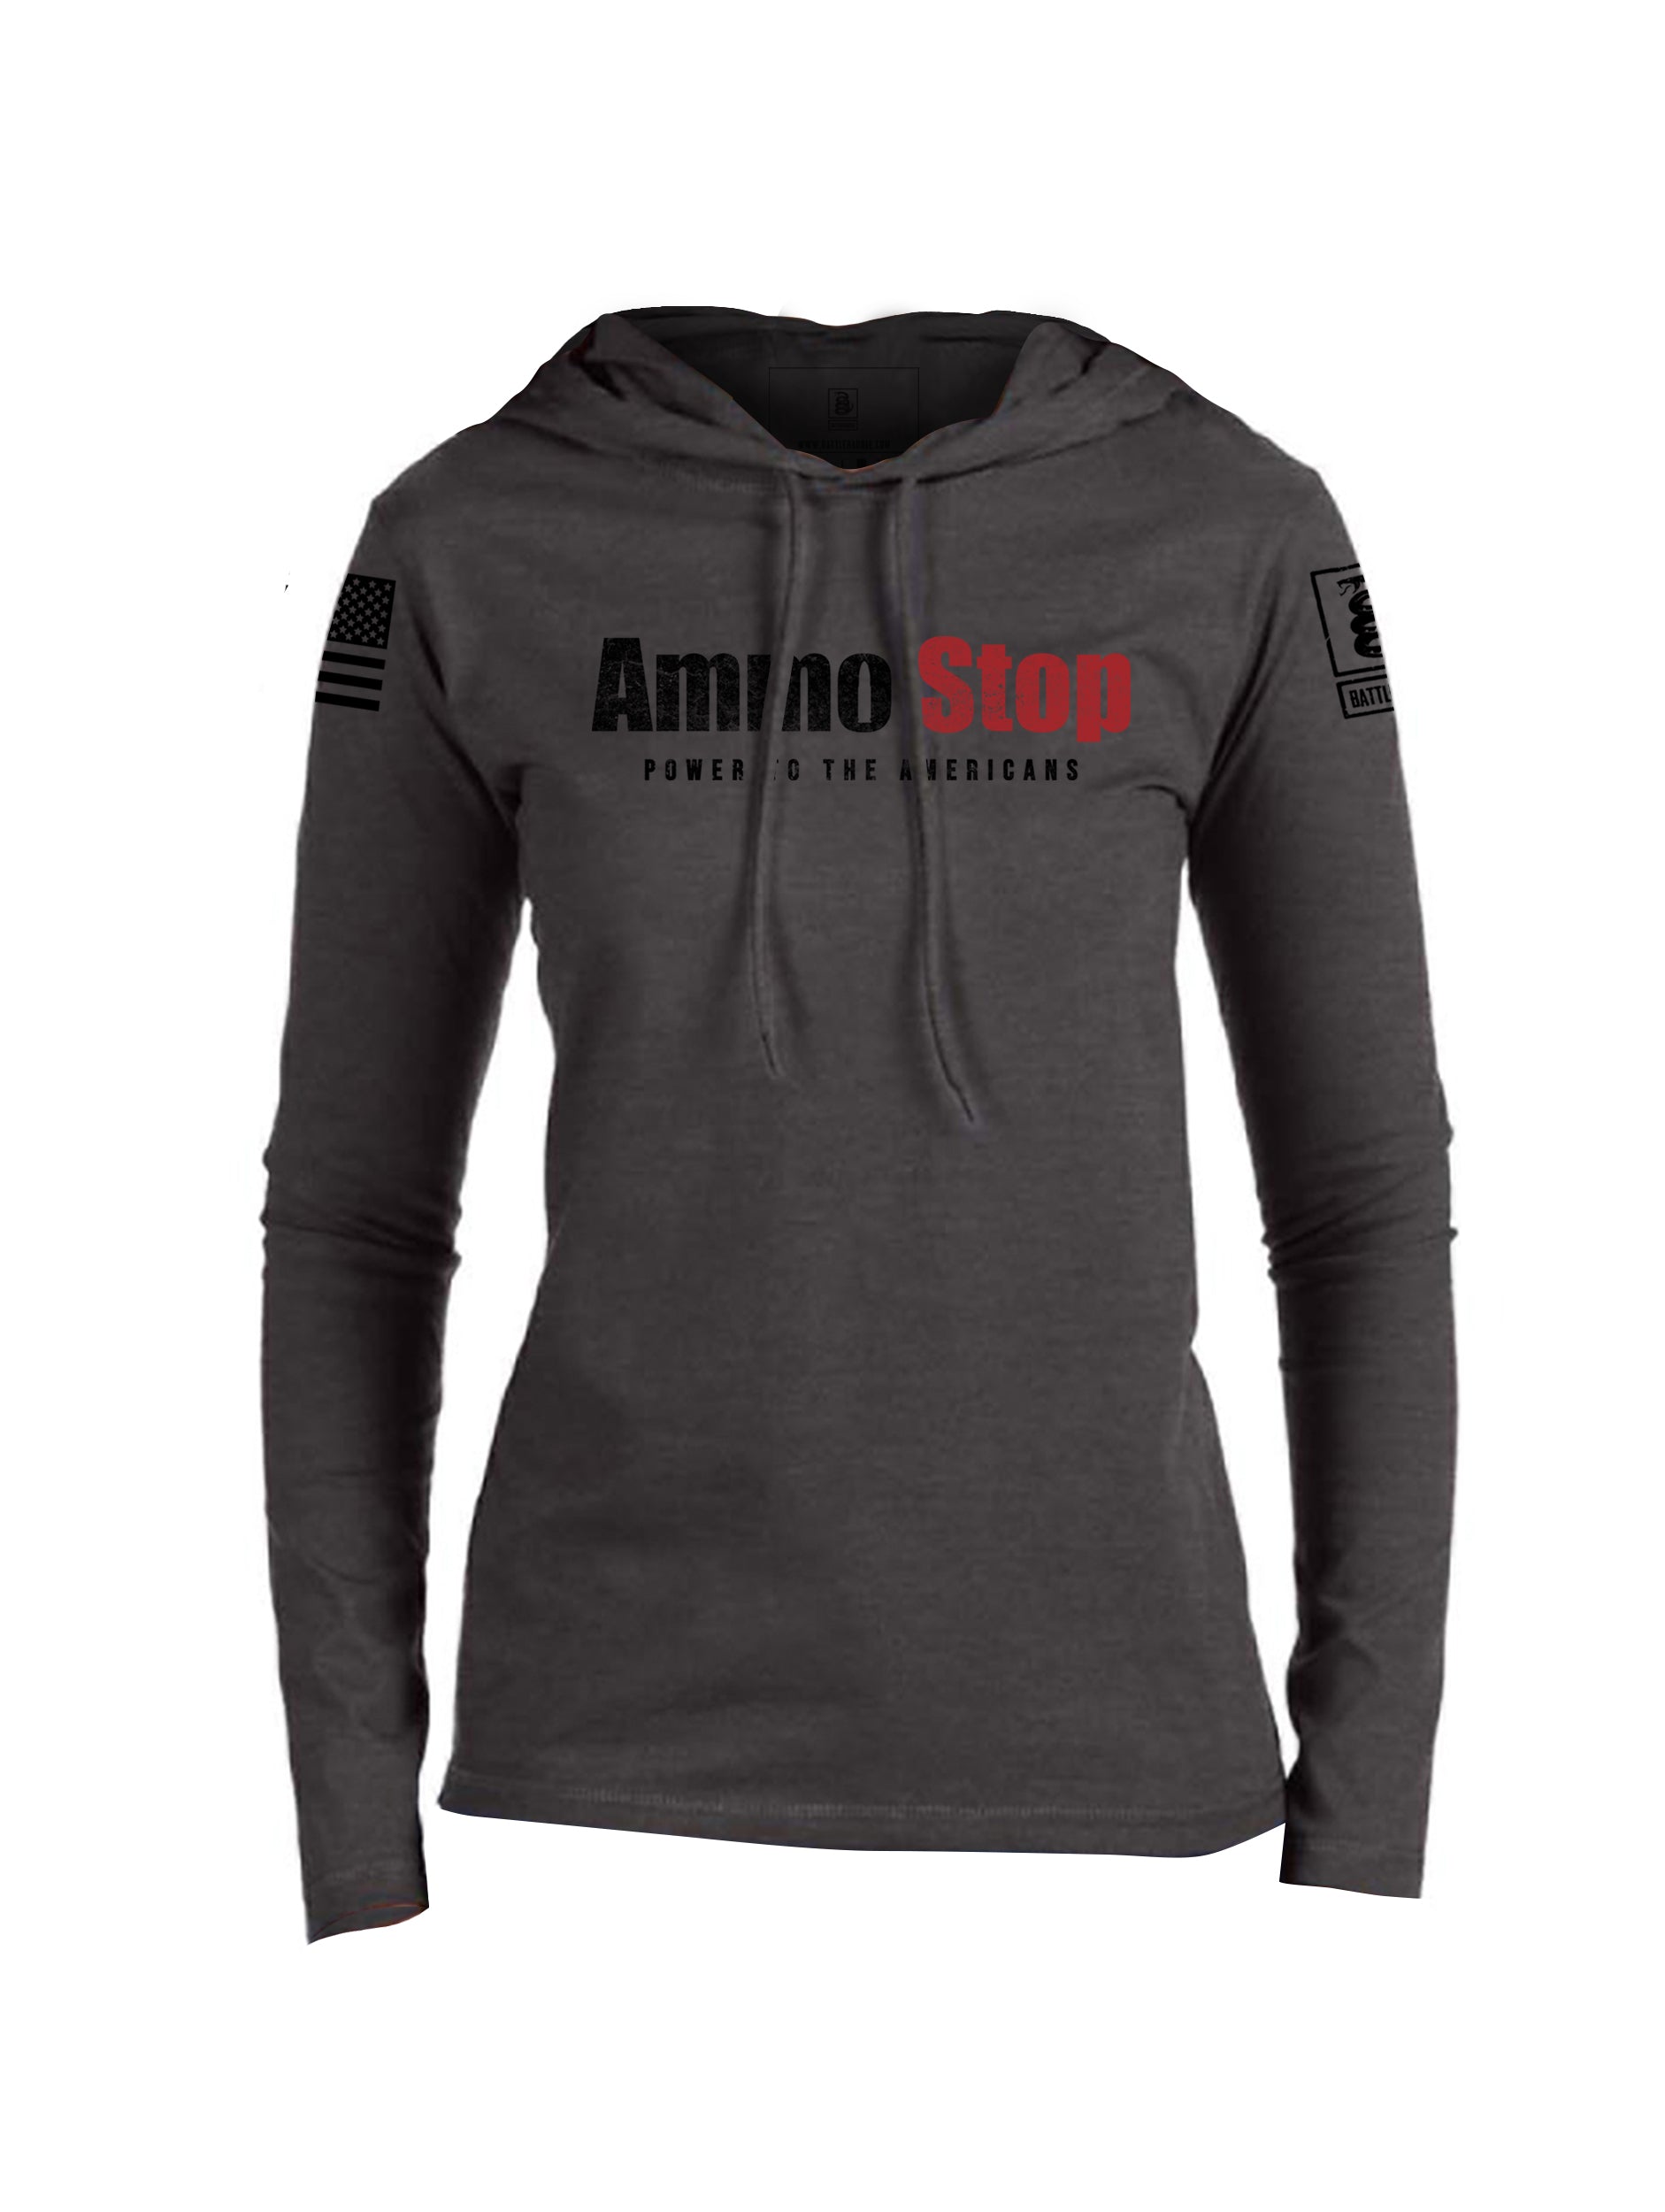 Battleraddle Ammo Stop Power To The Americans Womens Cotton Thin Lightweight Hoodie